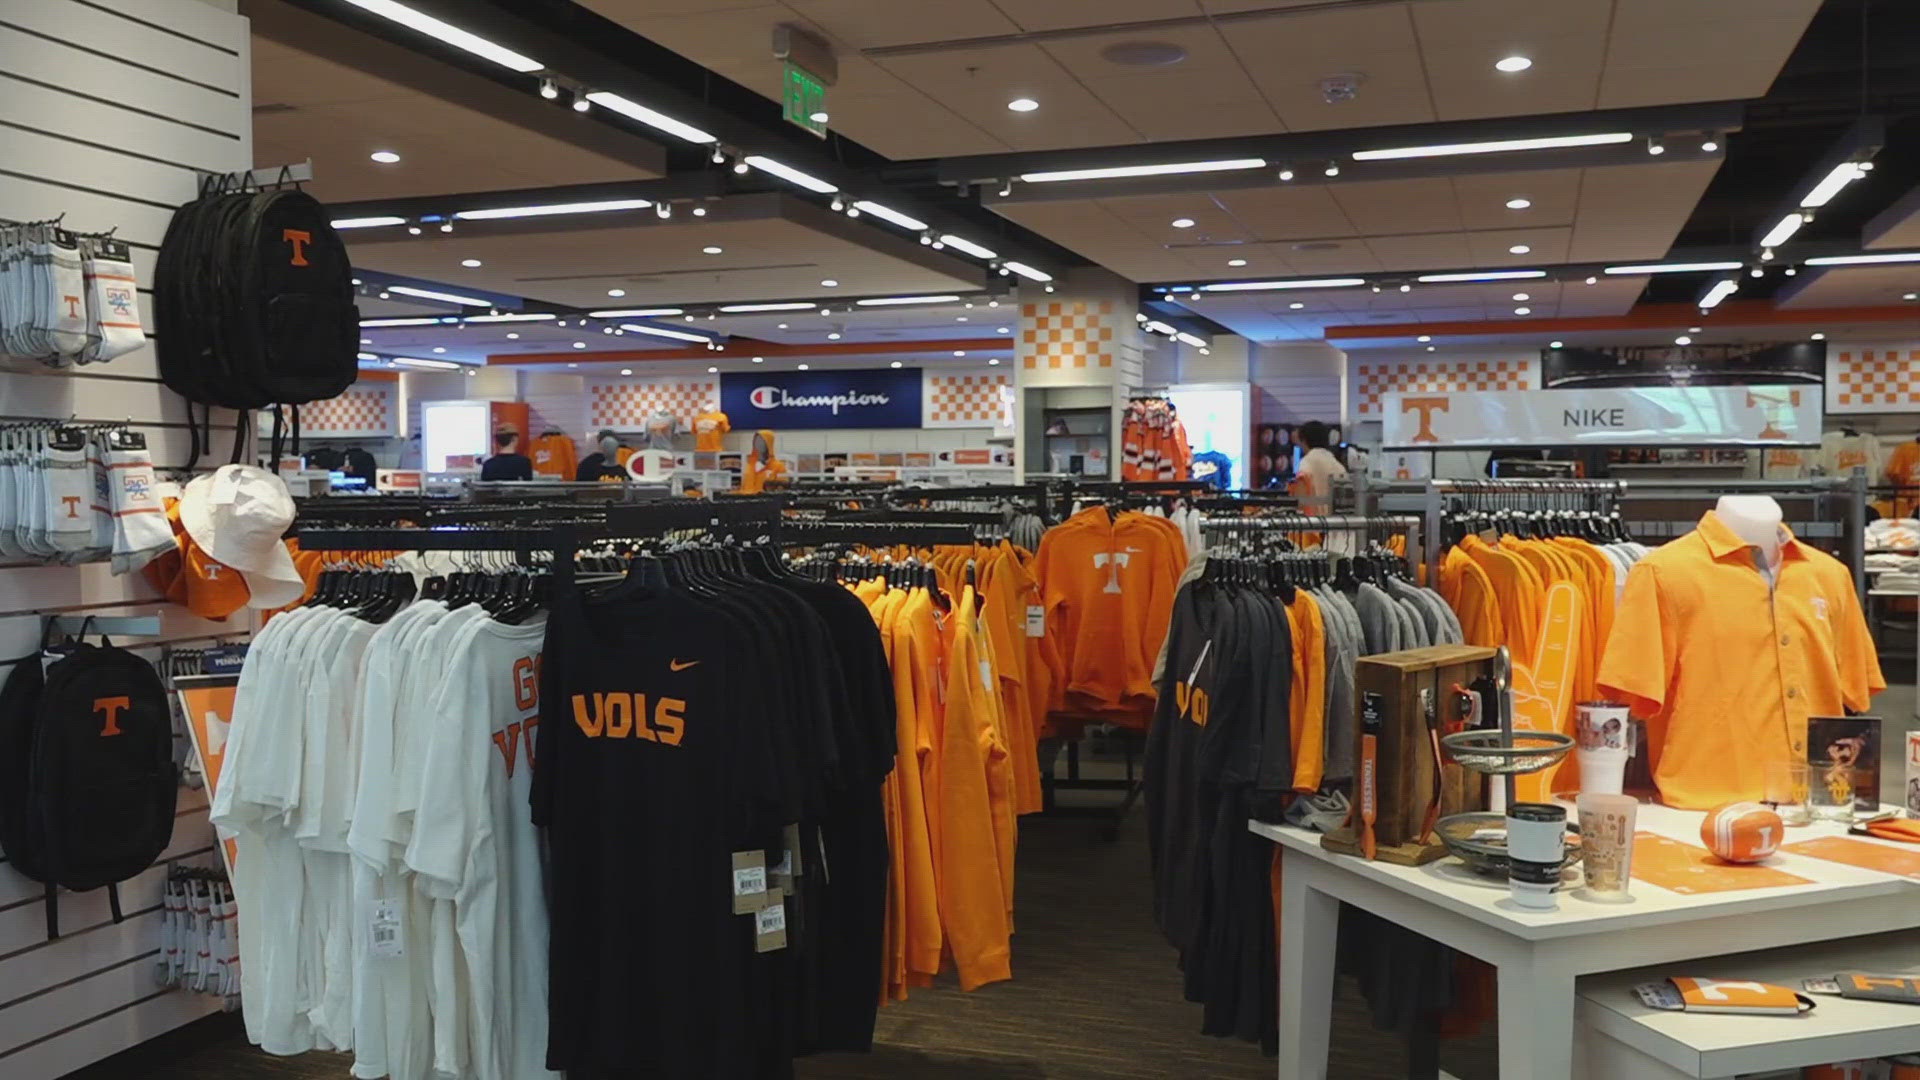 After UT baseball's National Championship win, the Vols went online to order merch on Vol Shop's website. So much so, that the website soon crashed.